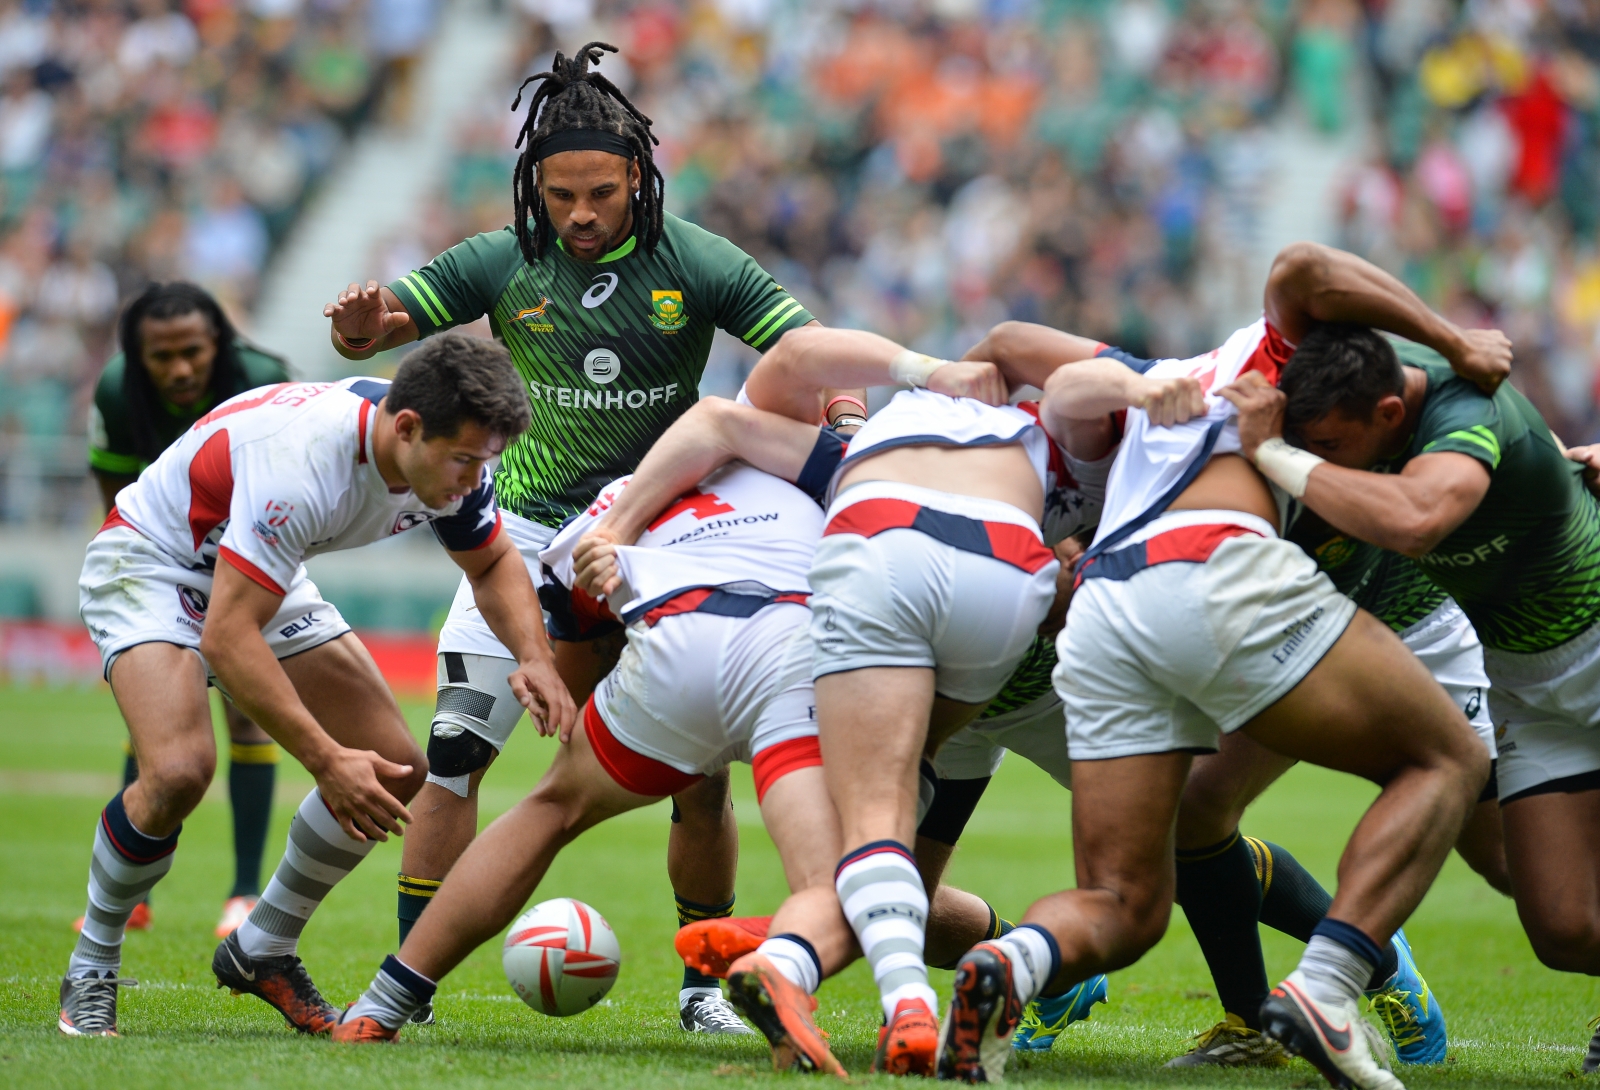 Rio 2016 Olympics Rugby sevens schedule, format, rules, athletes to watch